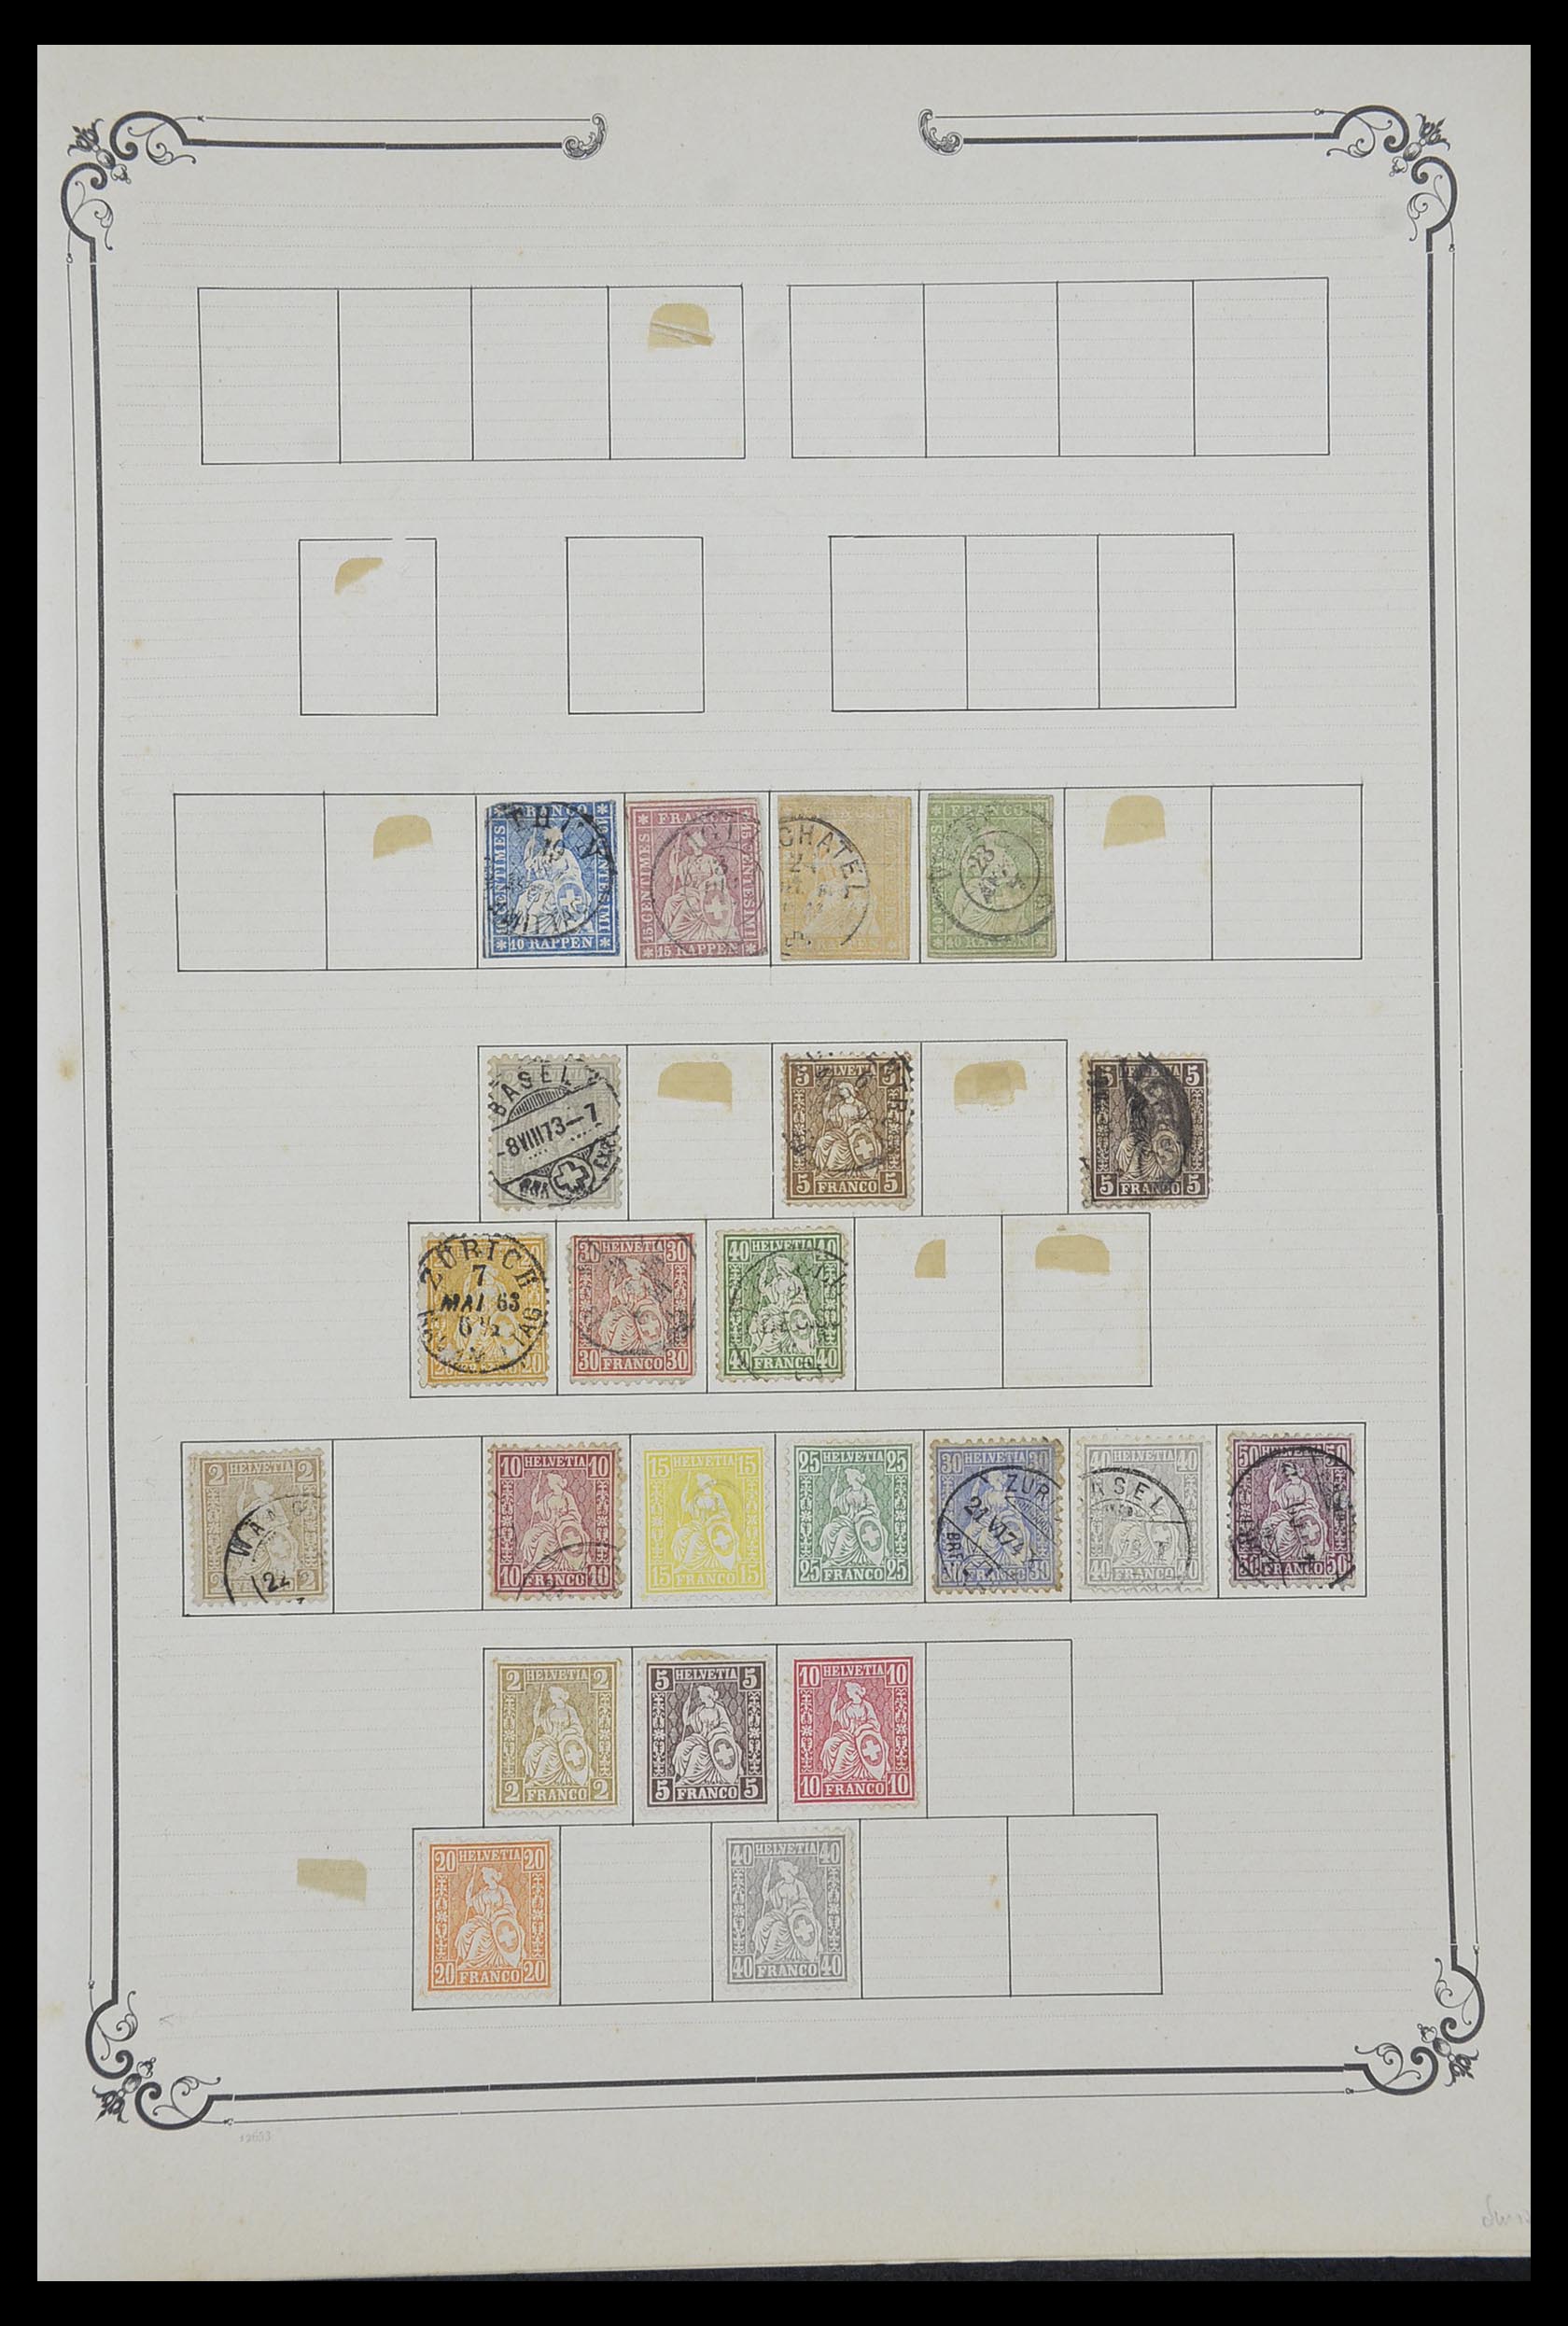 33991 035 - Stamp collection 33991 European countries 1851-ca. 1920.